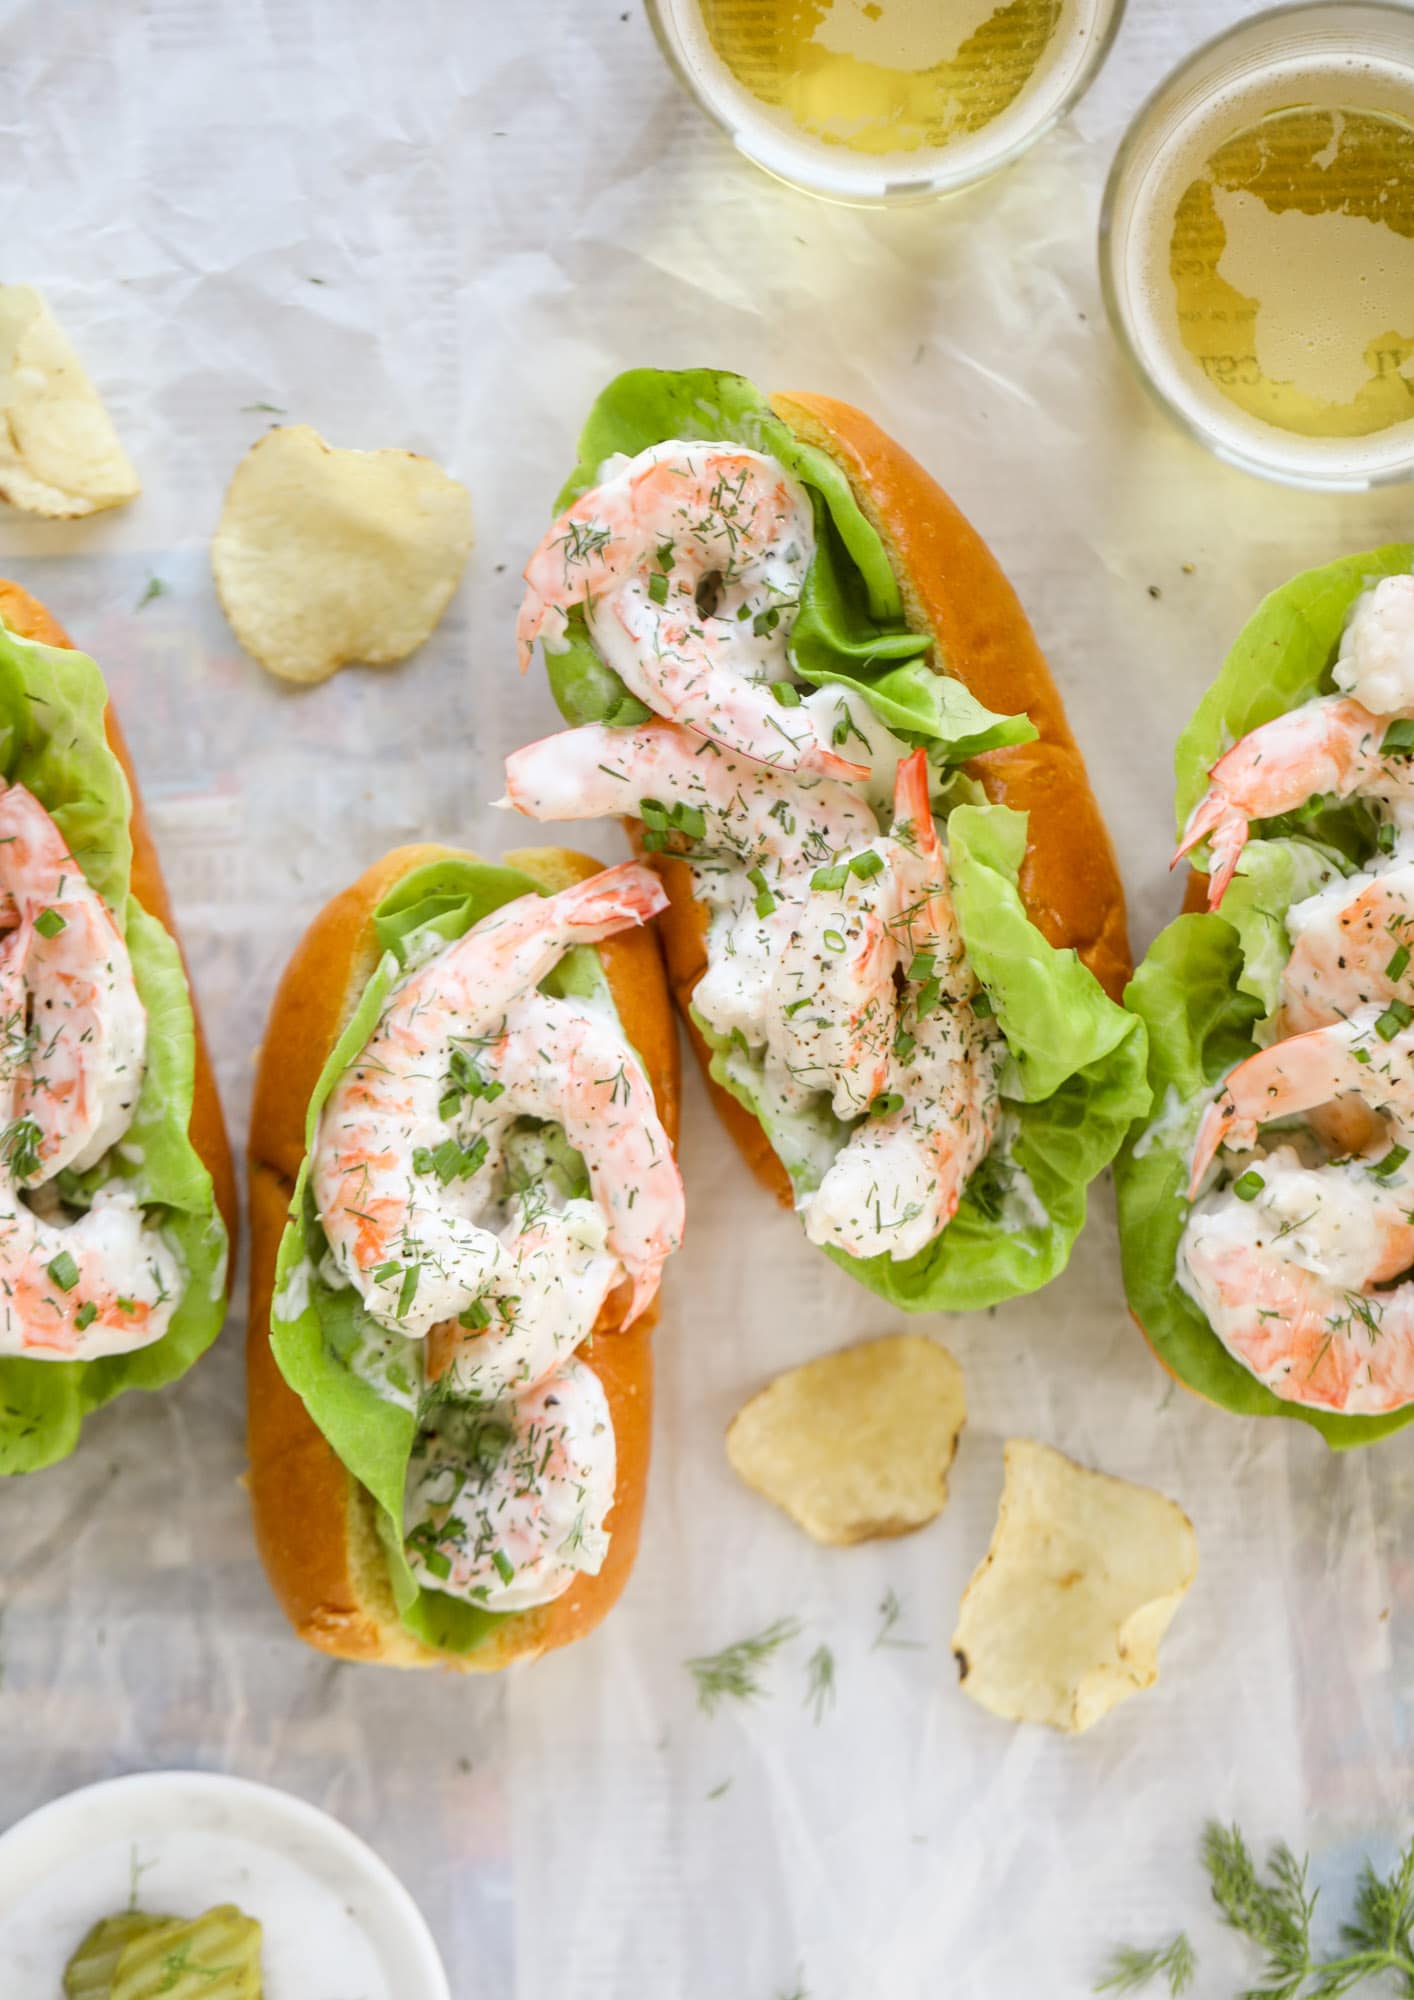 These shrimp salad rolls are my go-to simple, easy, no-cook dinner for hot summer day. Serve with pickles, potato chips and a spritz of lemon!